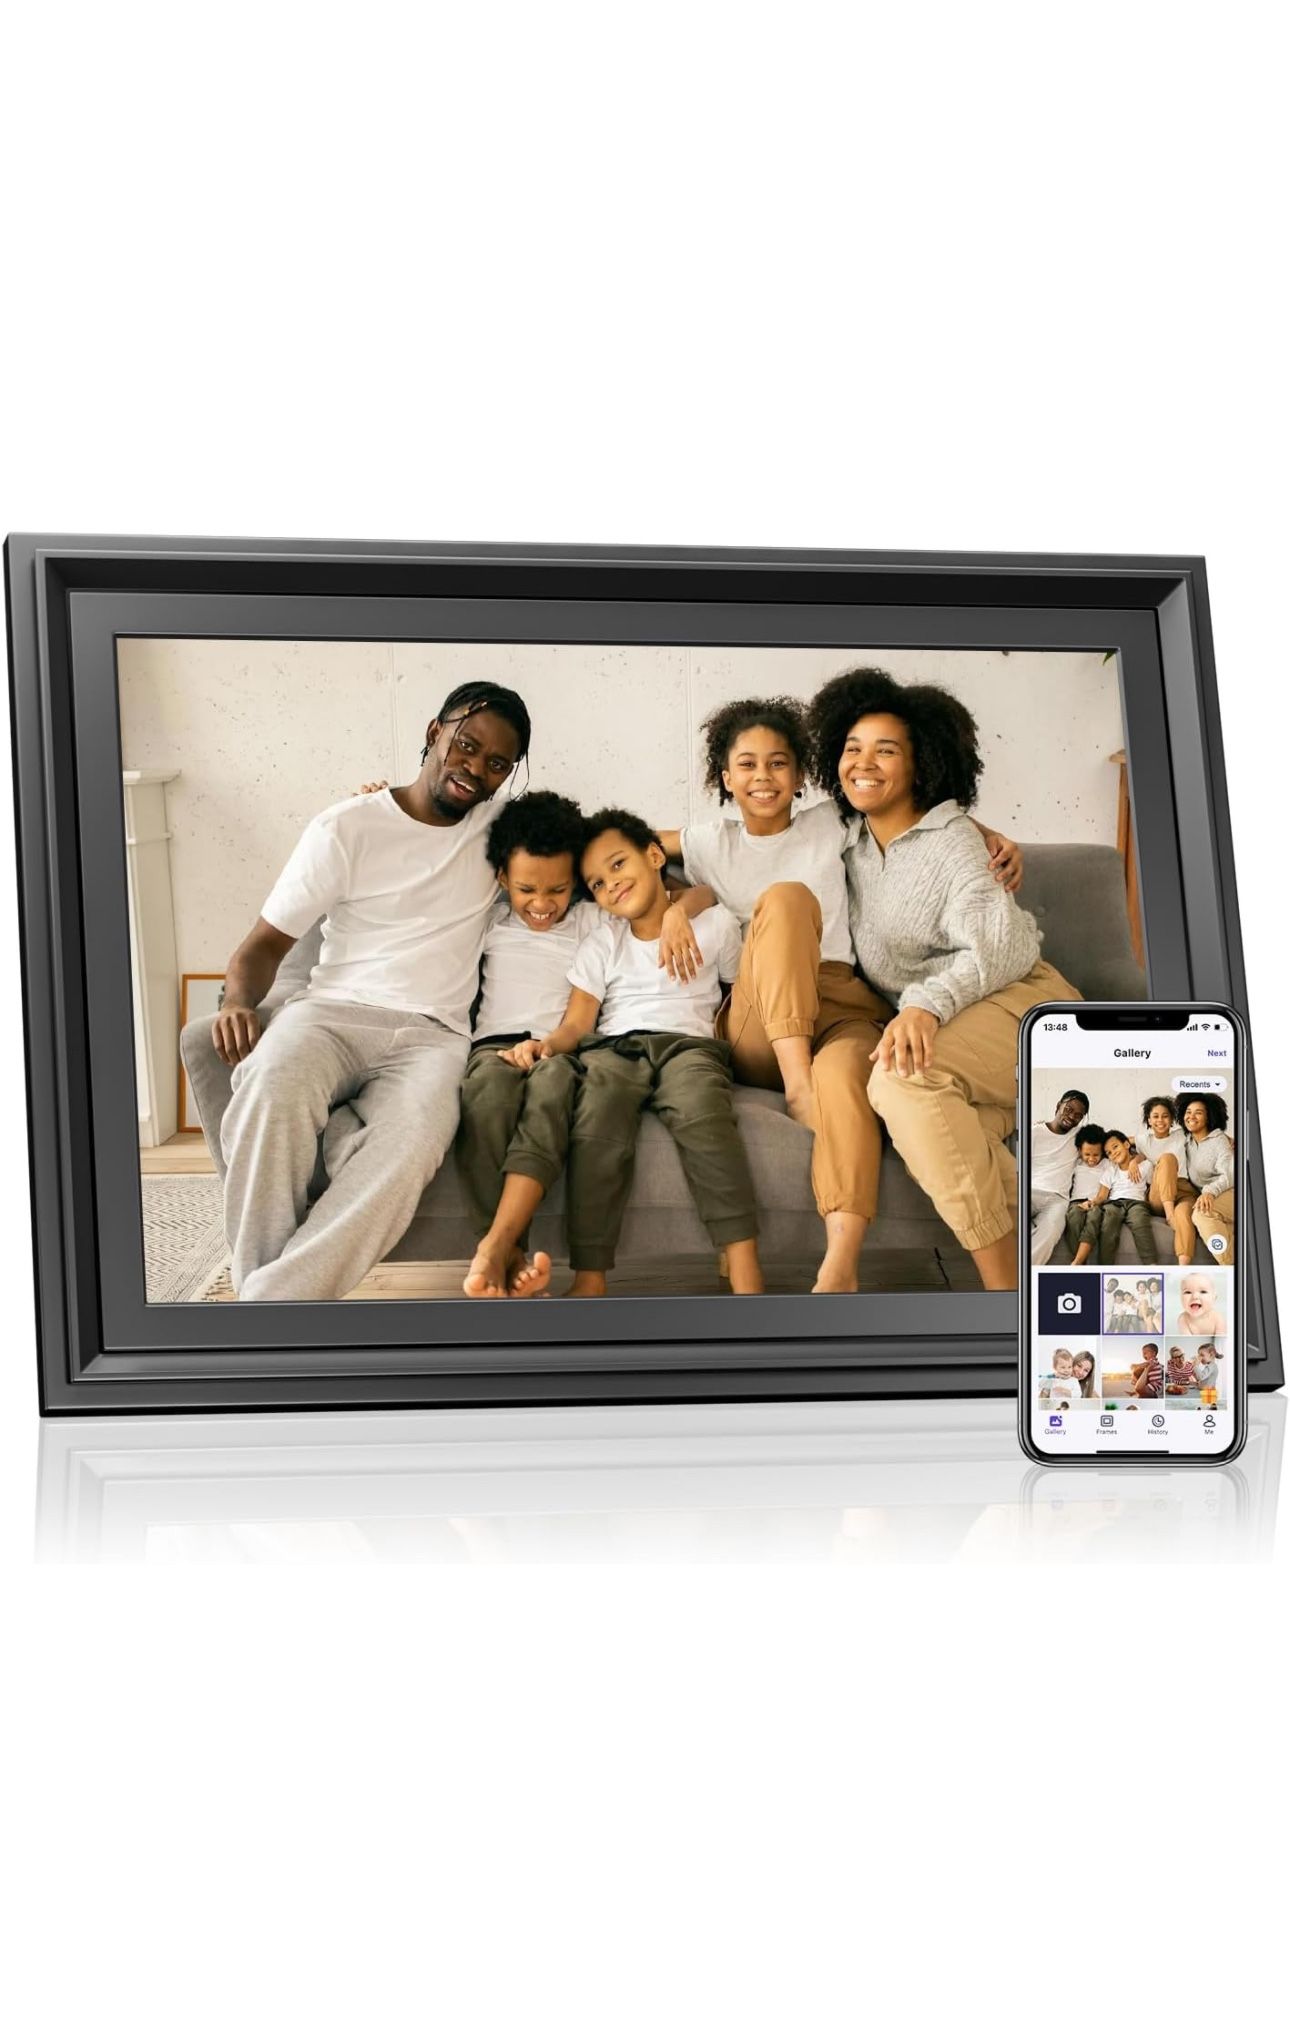 10.1 inch Digital Picture Frame WiFi Digital Photo Frame with 1280x800 IPS LCD Touch Screen, Auto-Rotate, Slideshow, to Share Photos or Videos Instant